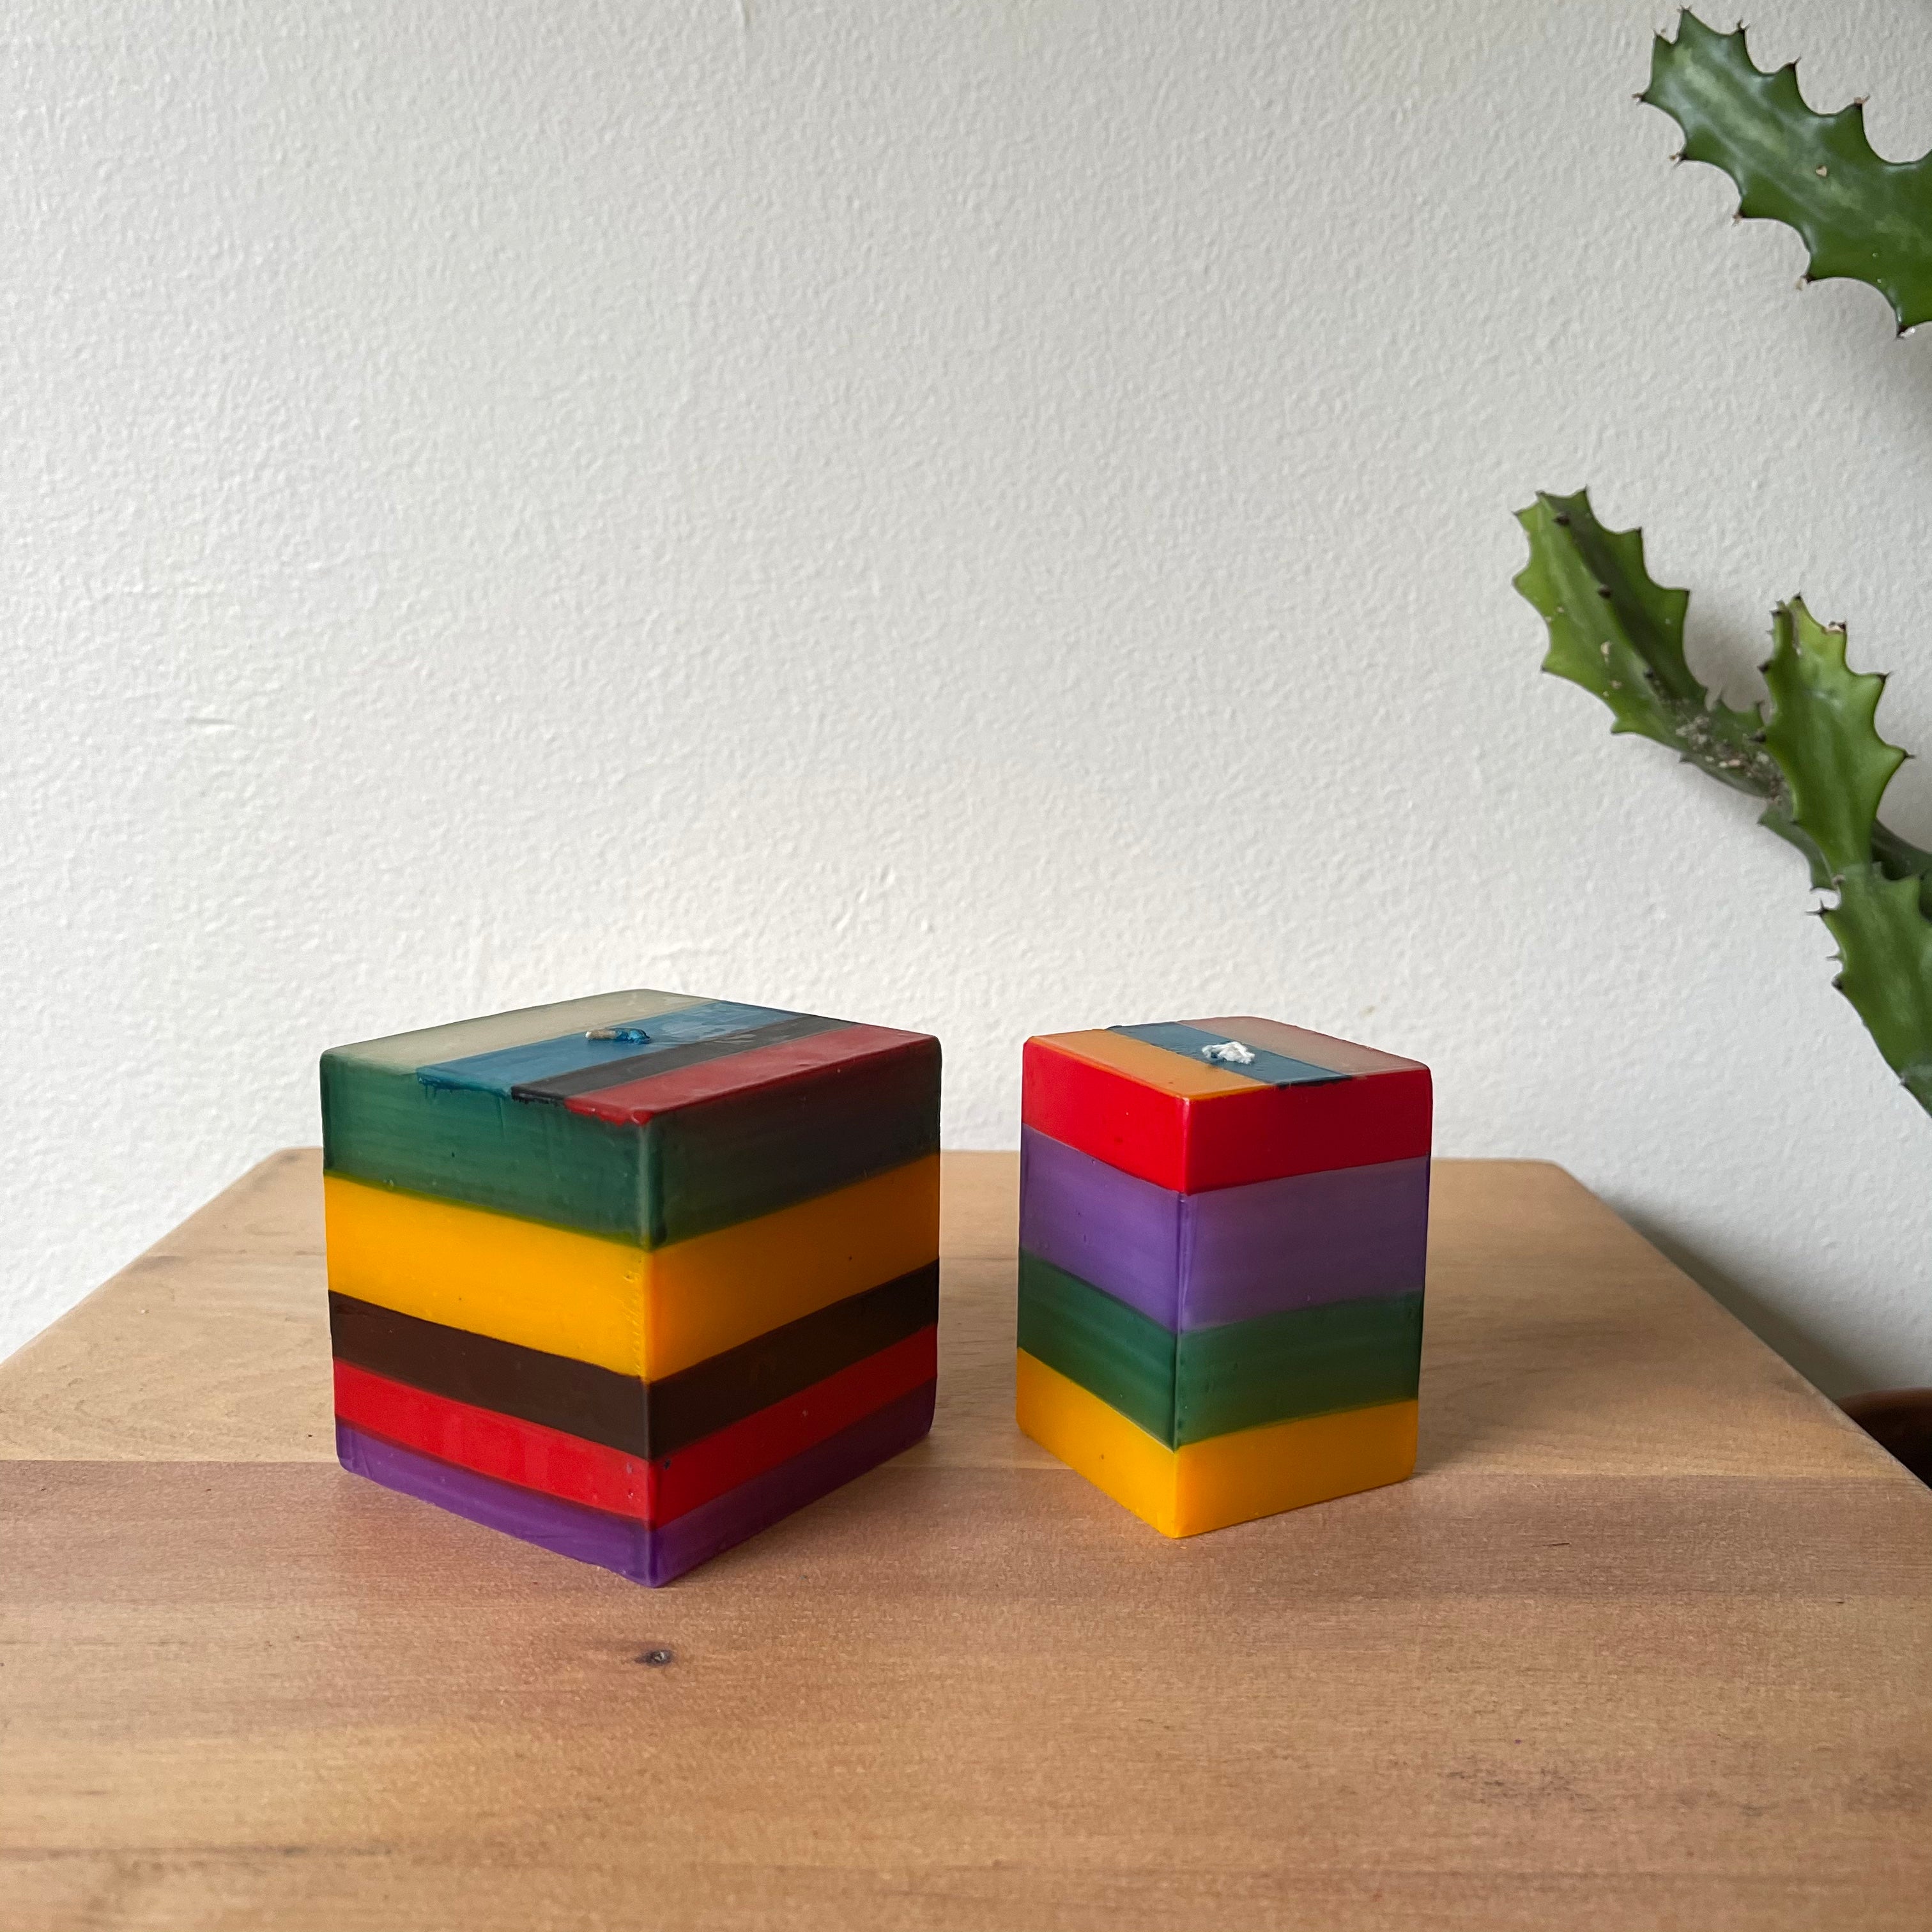 2/ Memphis Stripe cube candles.  3x3x3 cube candle and 2x2x3 cube candle.  Painted in stripes of green, yellow brown, red and purple.  